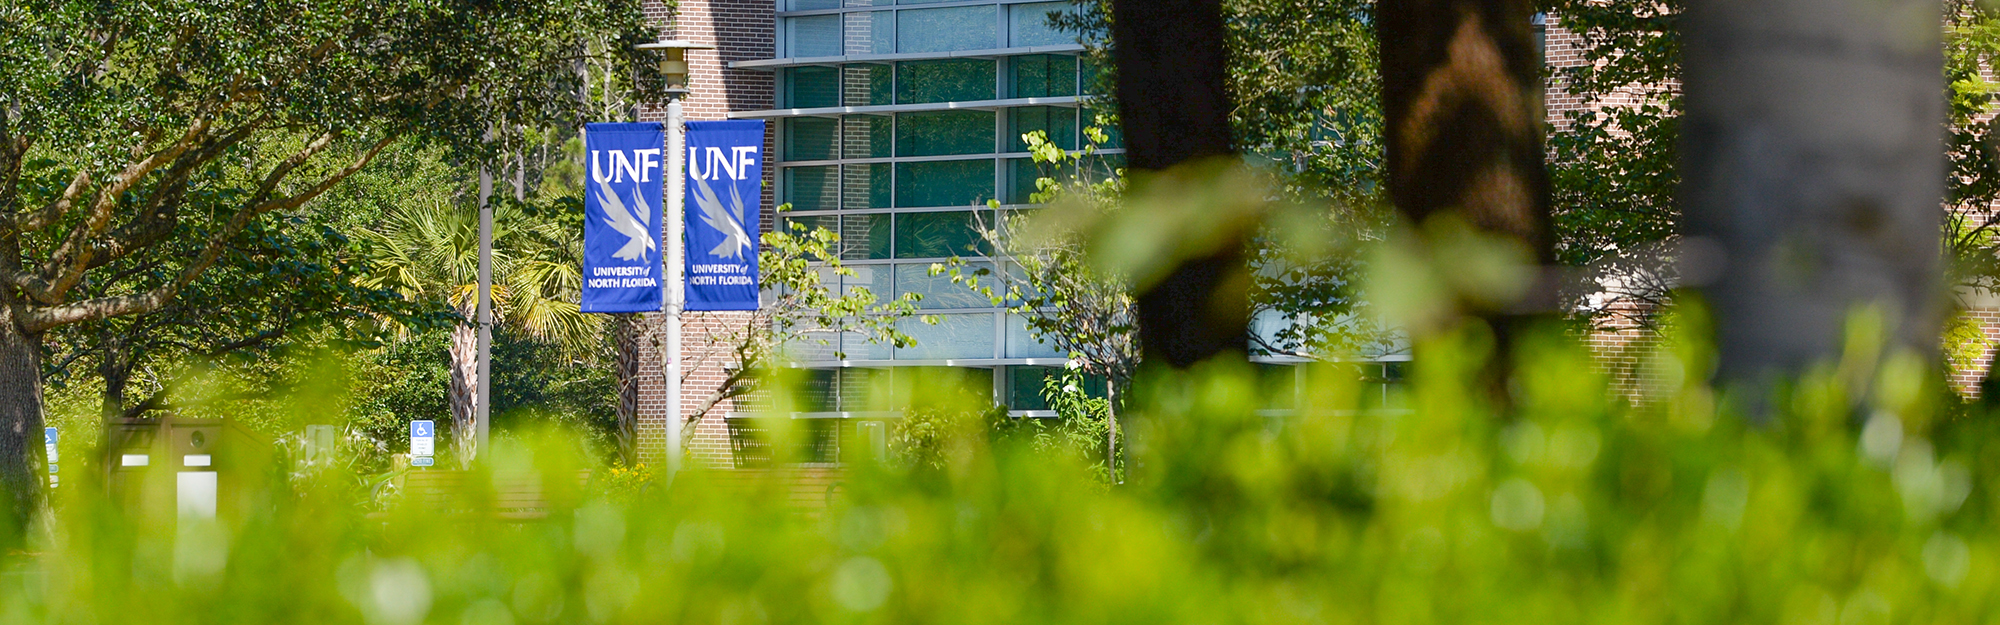 UNF banners on campus